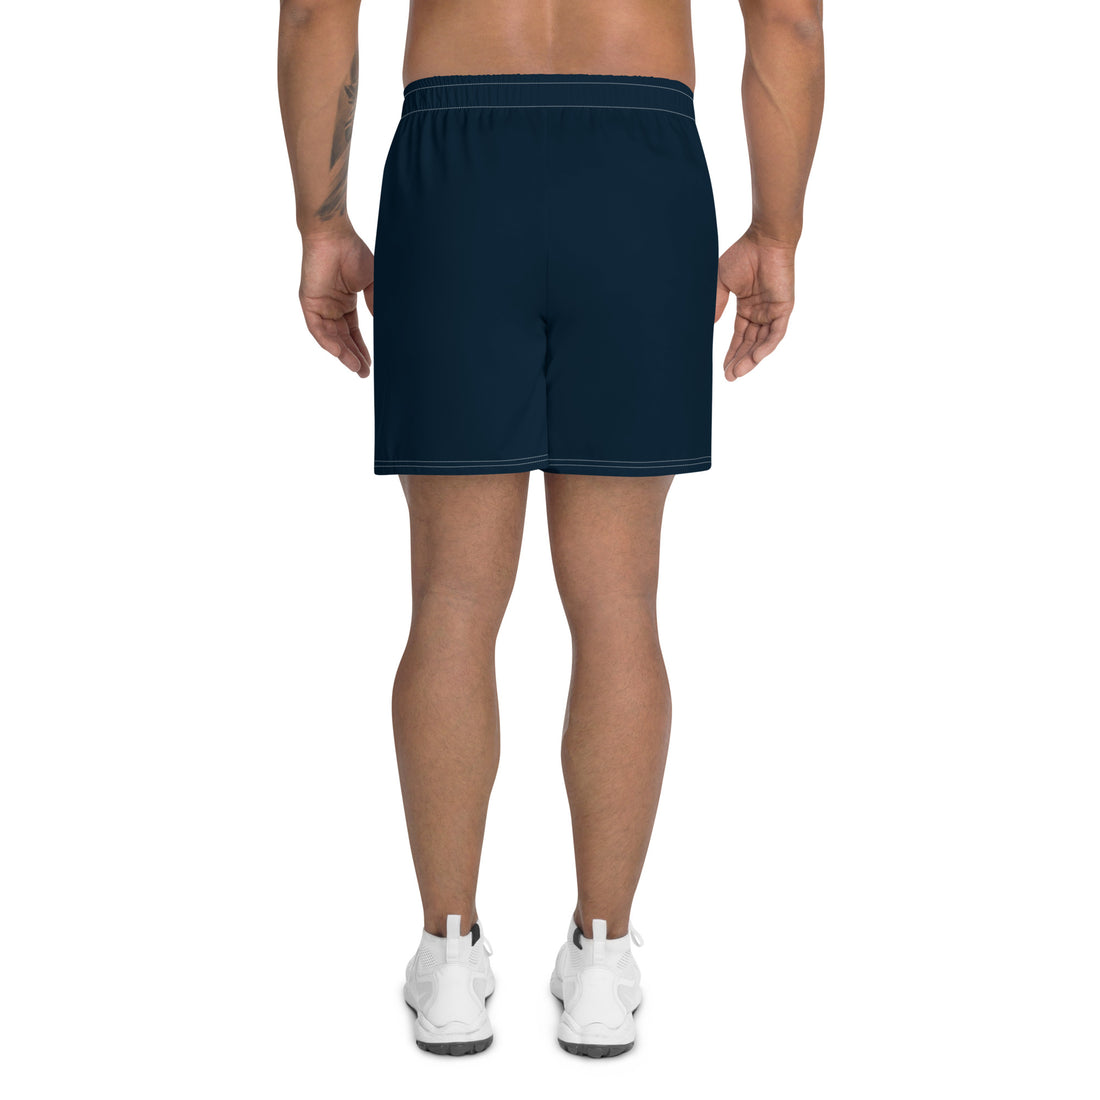 Michael Chen 23 Boca Raton Picklers™ SKYblue™ 2023 Authentic Shorts for Men